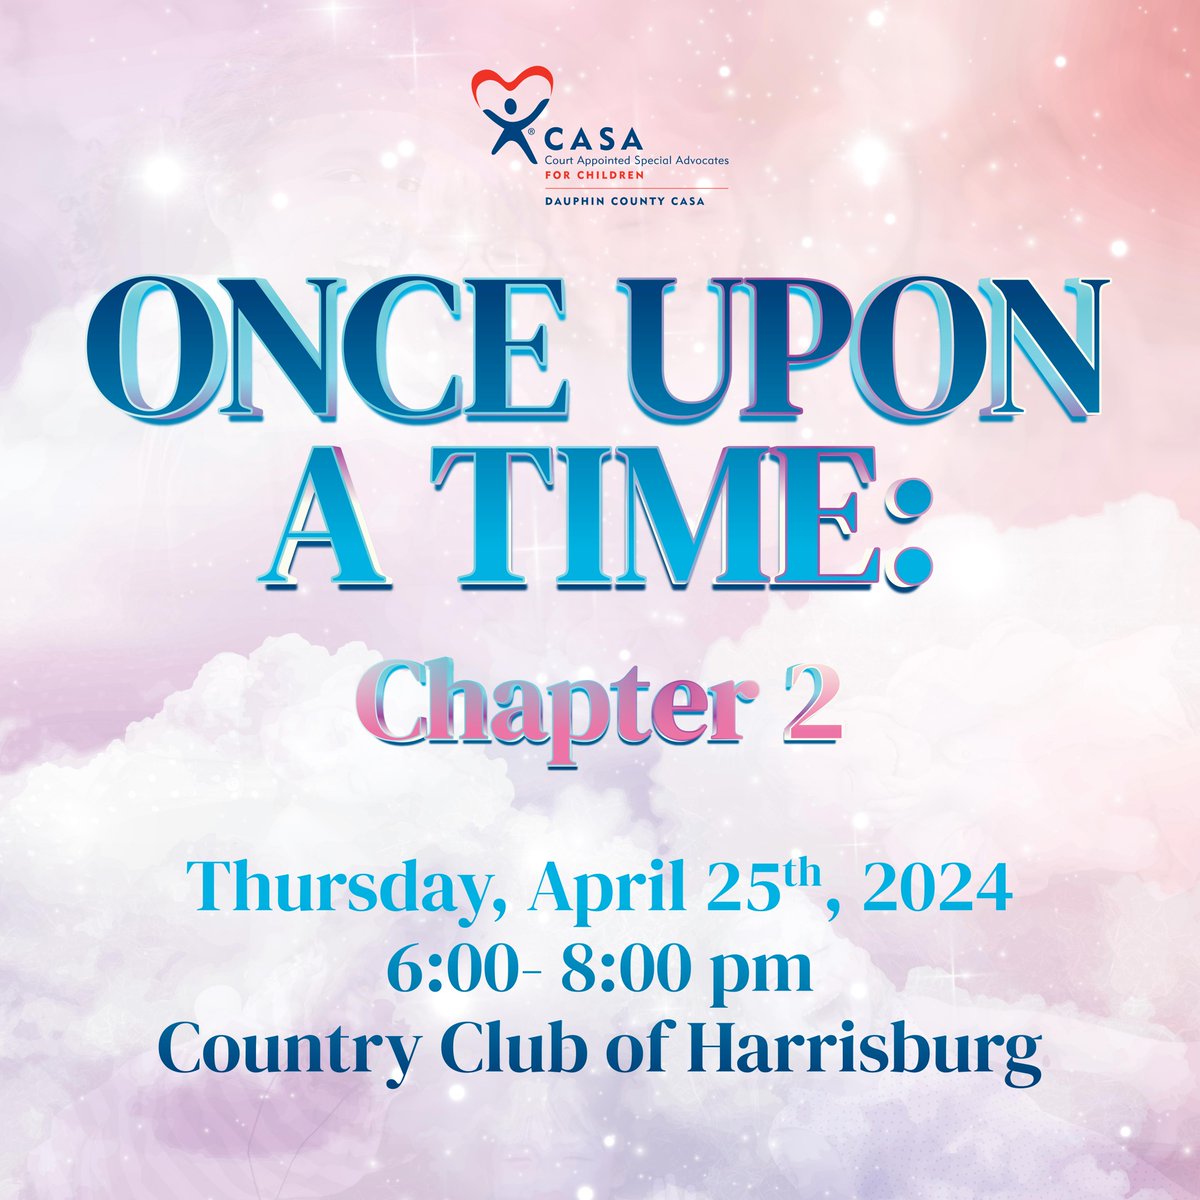 Have you purchased your Once Upon A Time: Chapter 2 tickets yet? Only THREE days left! Ticket sales end April 20th at 11:59pm. Come celebrate with us at The Country Club of Harrisburg on April 25th from 6pm to 8pm. We can't wait to see you there! 📖 ✨